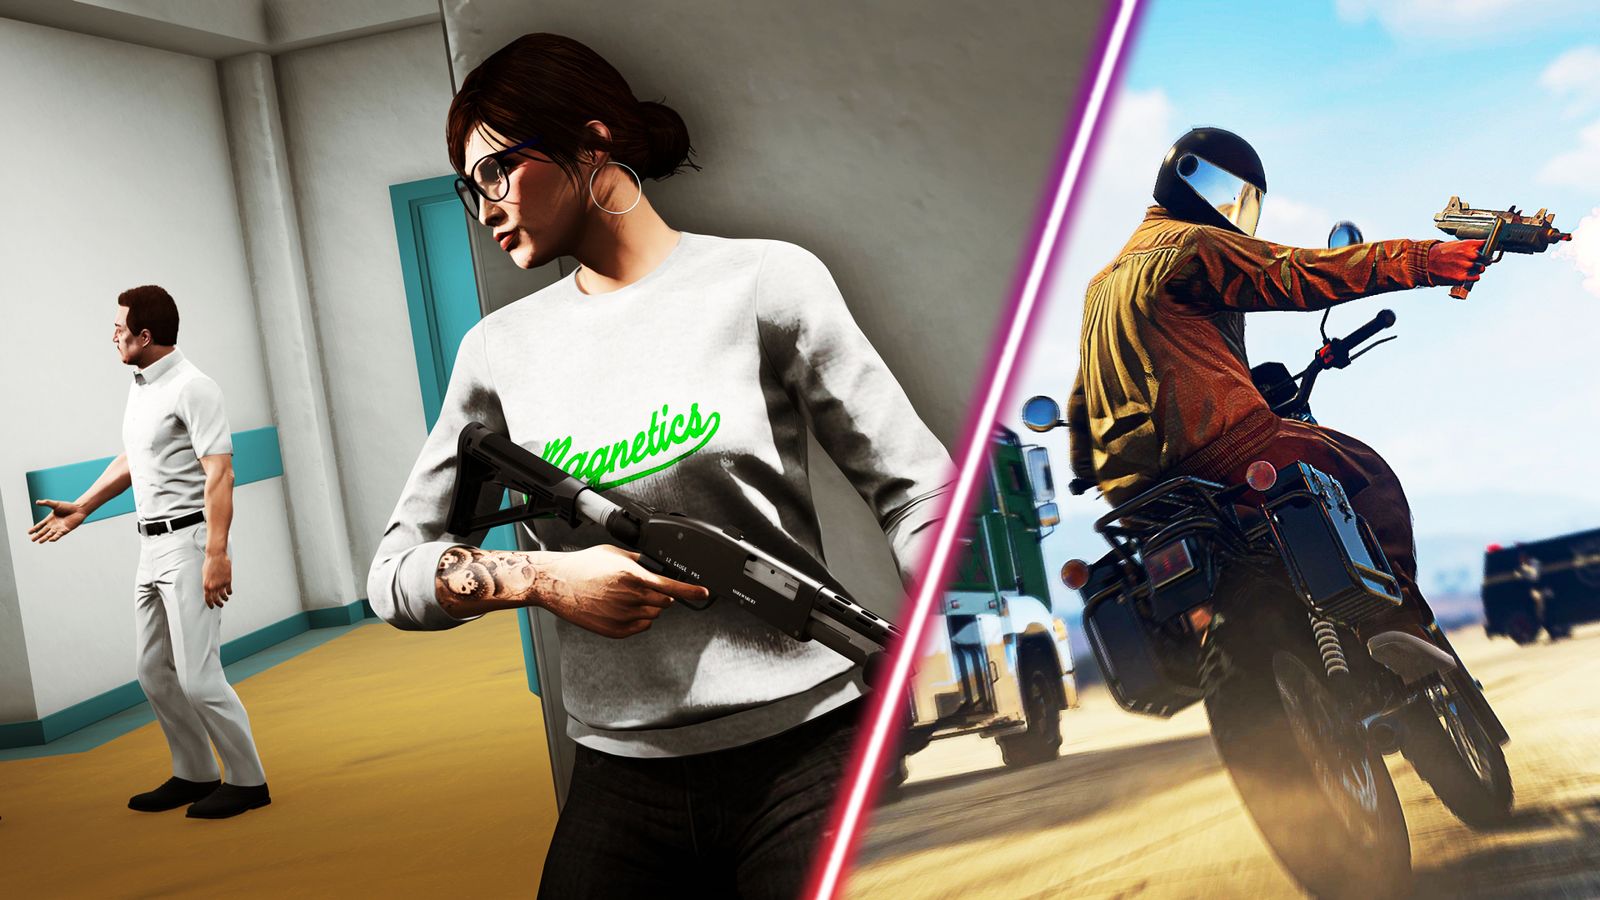 Some story-focused and single player-oriented content in GTA Online.